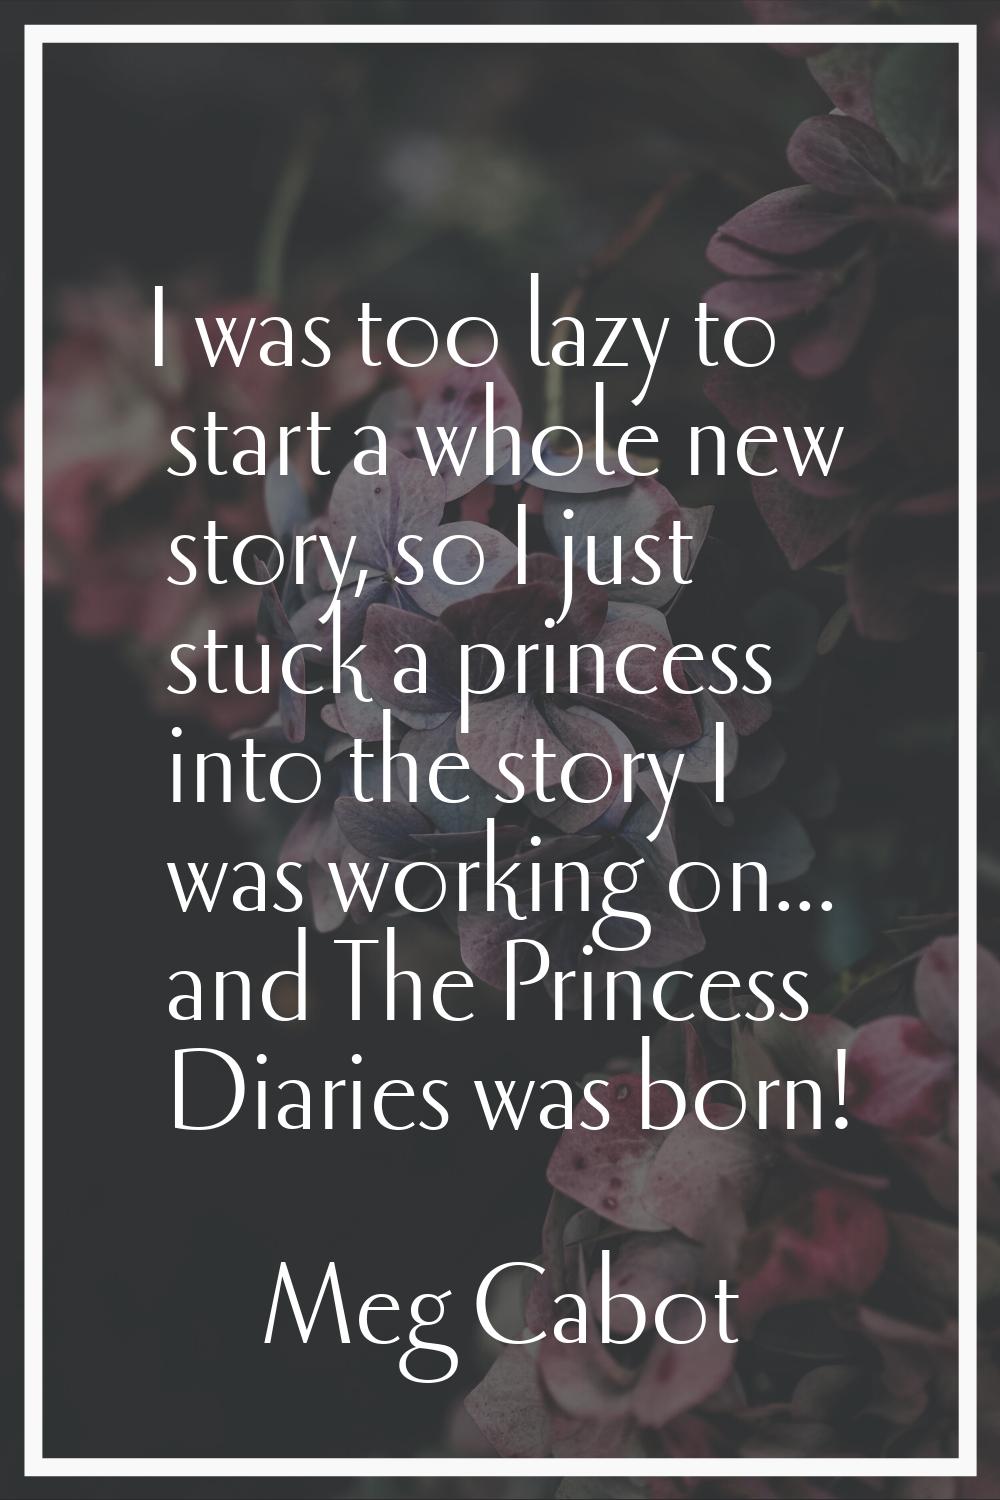 I was too lazy to start a whole new story, so I just stuck a princess into the story I was working 